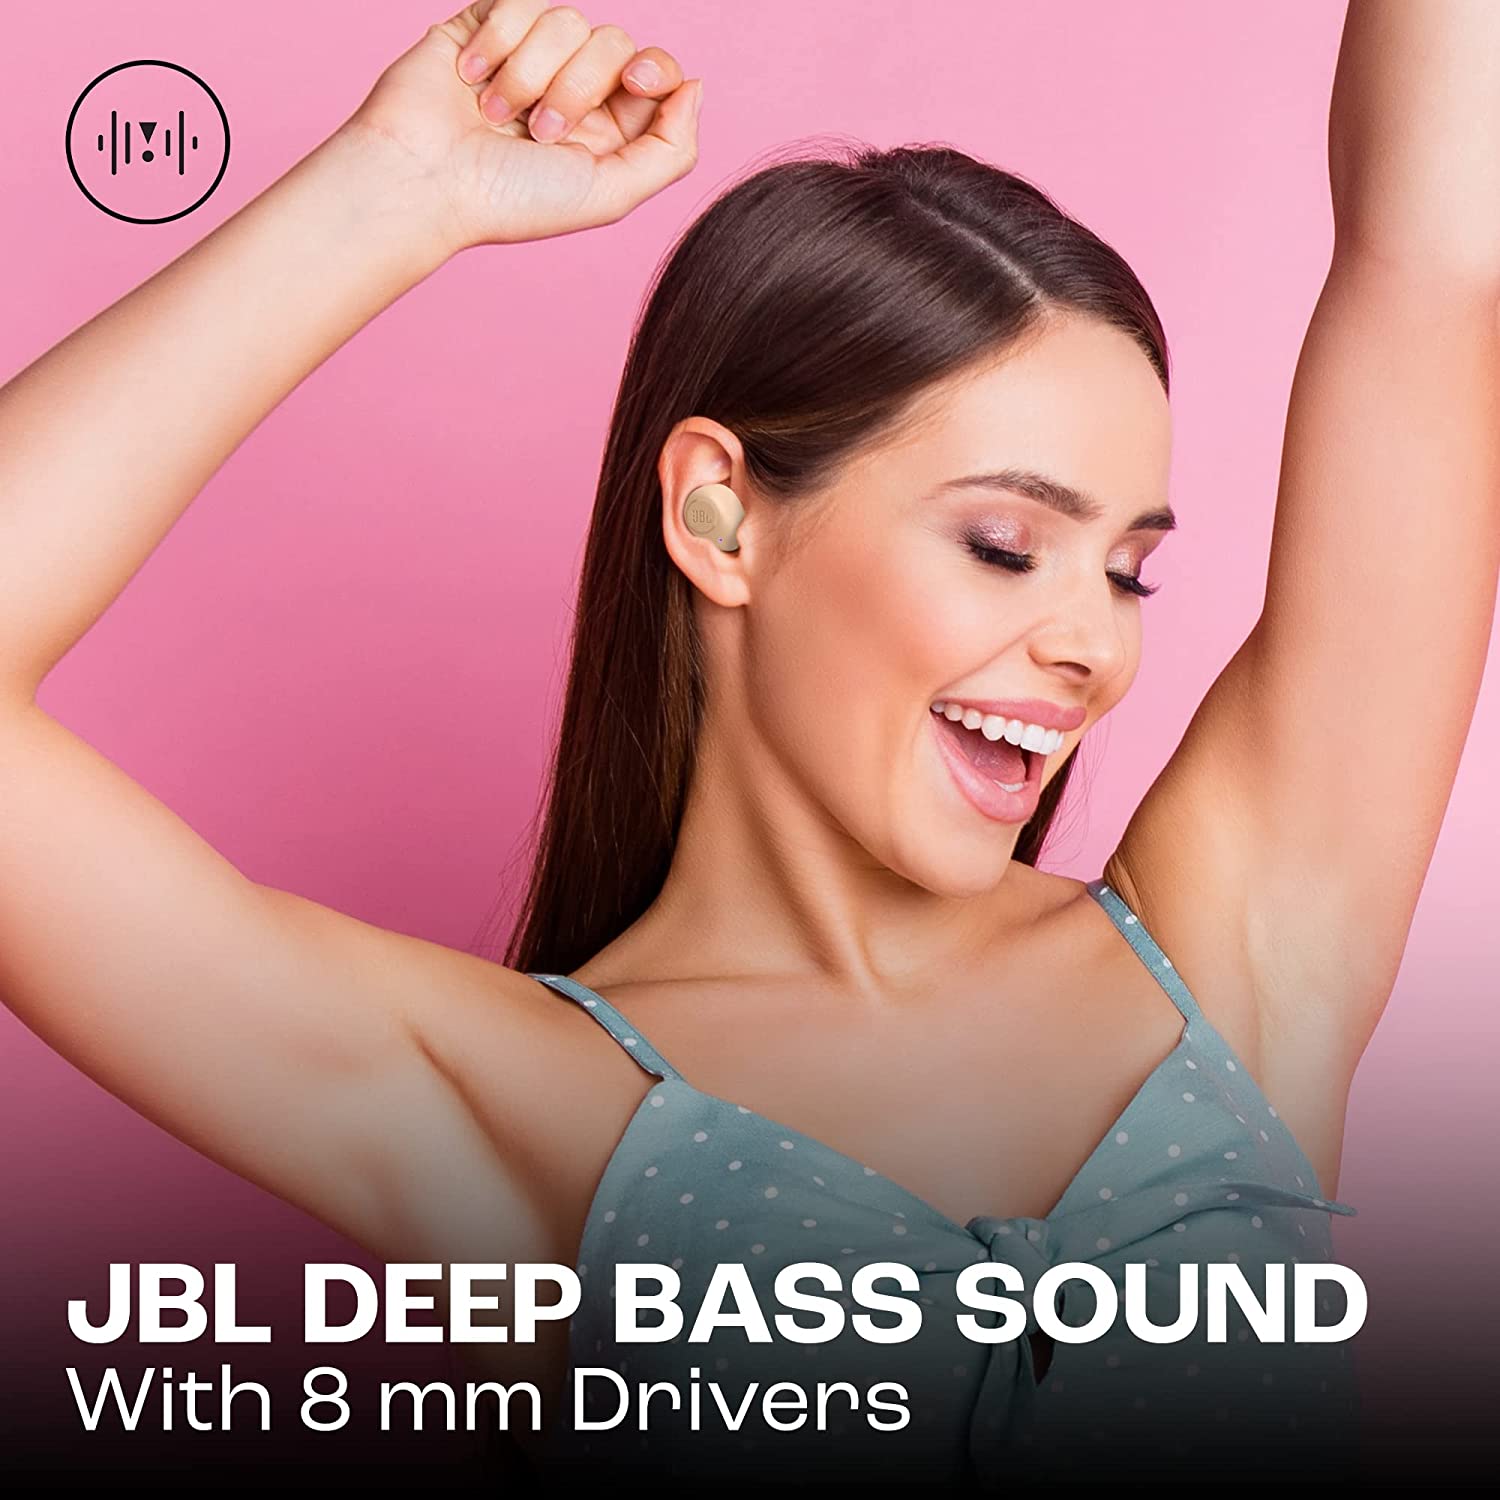 JBL Wave Buds in-Ear Earbuds (TWS) with Mic, App for Customized Extra Bass EQ, 32 Hrs Battery and Quick Charge, IP54, Ambient Aware & Talk-Thru, Google FastPair (Mint)